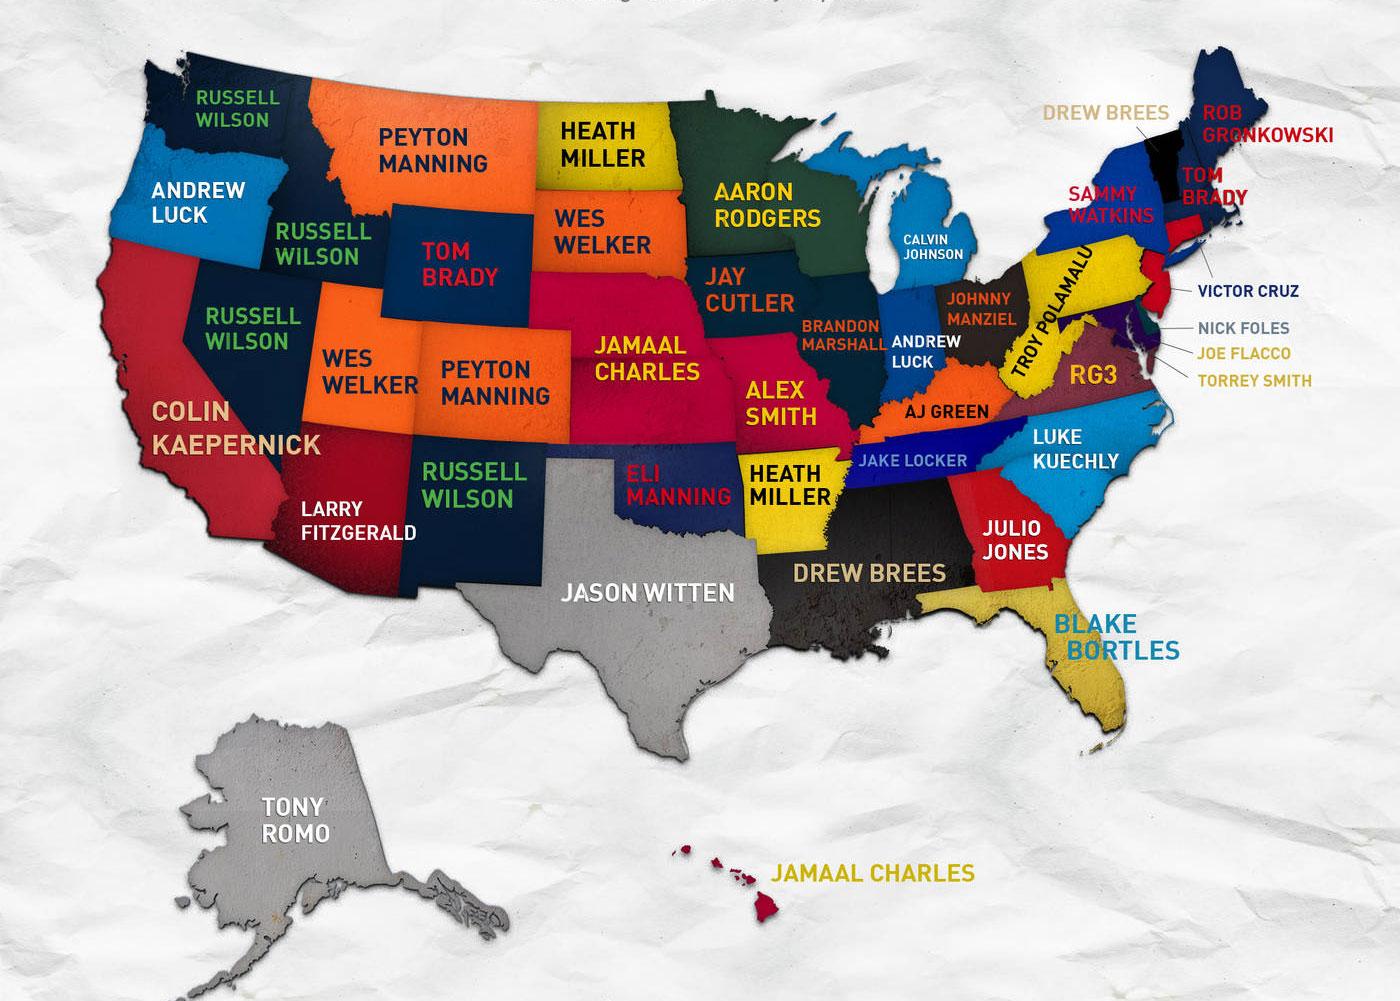 Måne læsning melodrama Adweek on Twitter: "U.S. map shows the best-selling NFL jersey among women  in each state. Larger version: http://t.co/eSbPsL1tno  http://t.co/fFhXXiLqL5" / Twitter